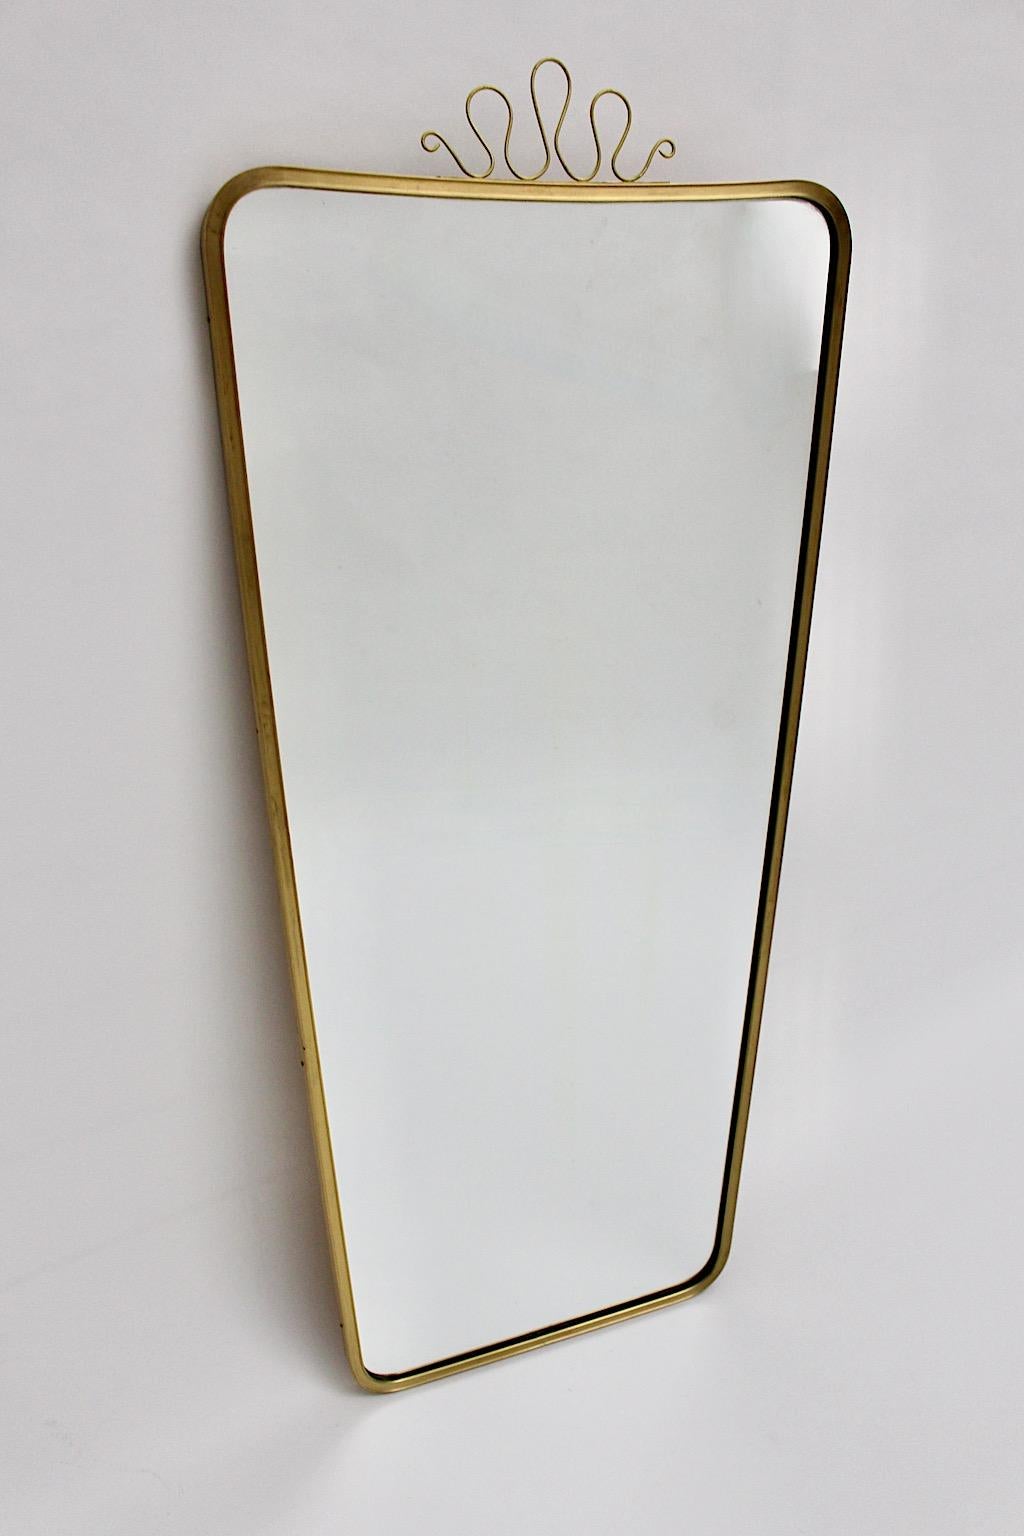 Mid Century Modern Vintage Brass Full Length Floor Mirror with Loops Italy 1950s 1